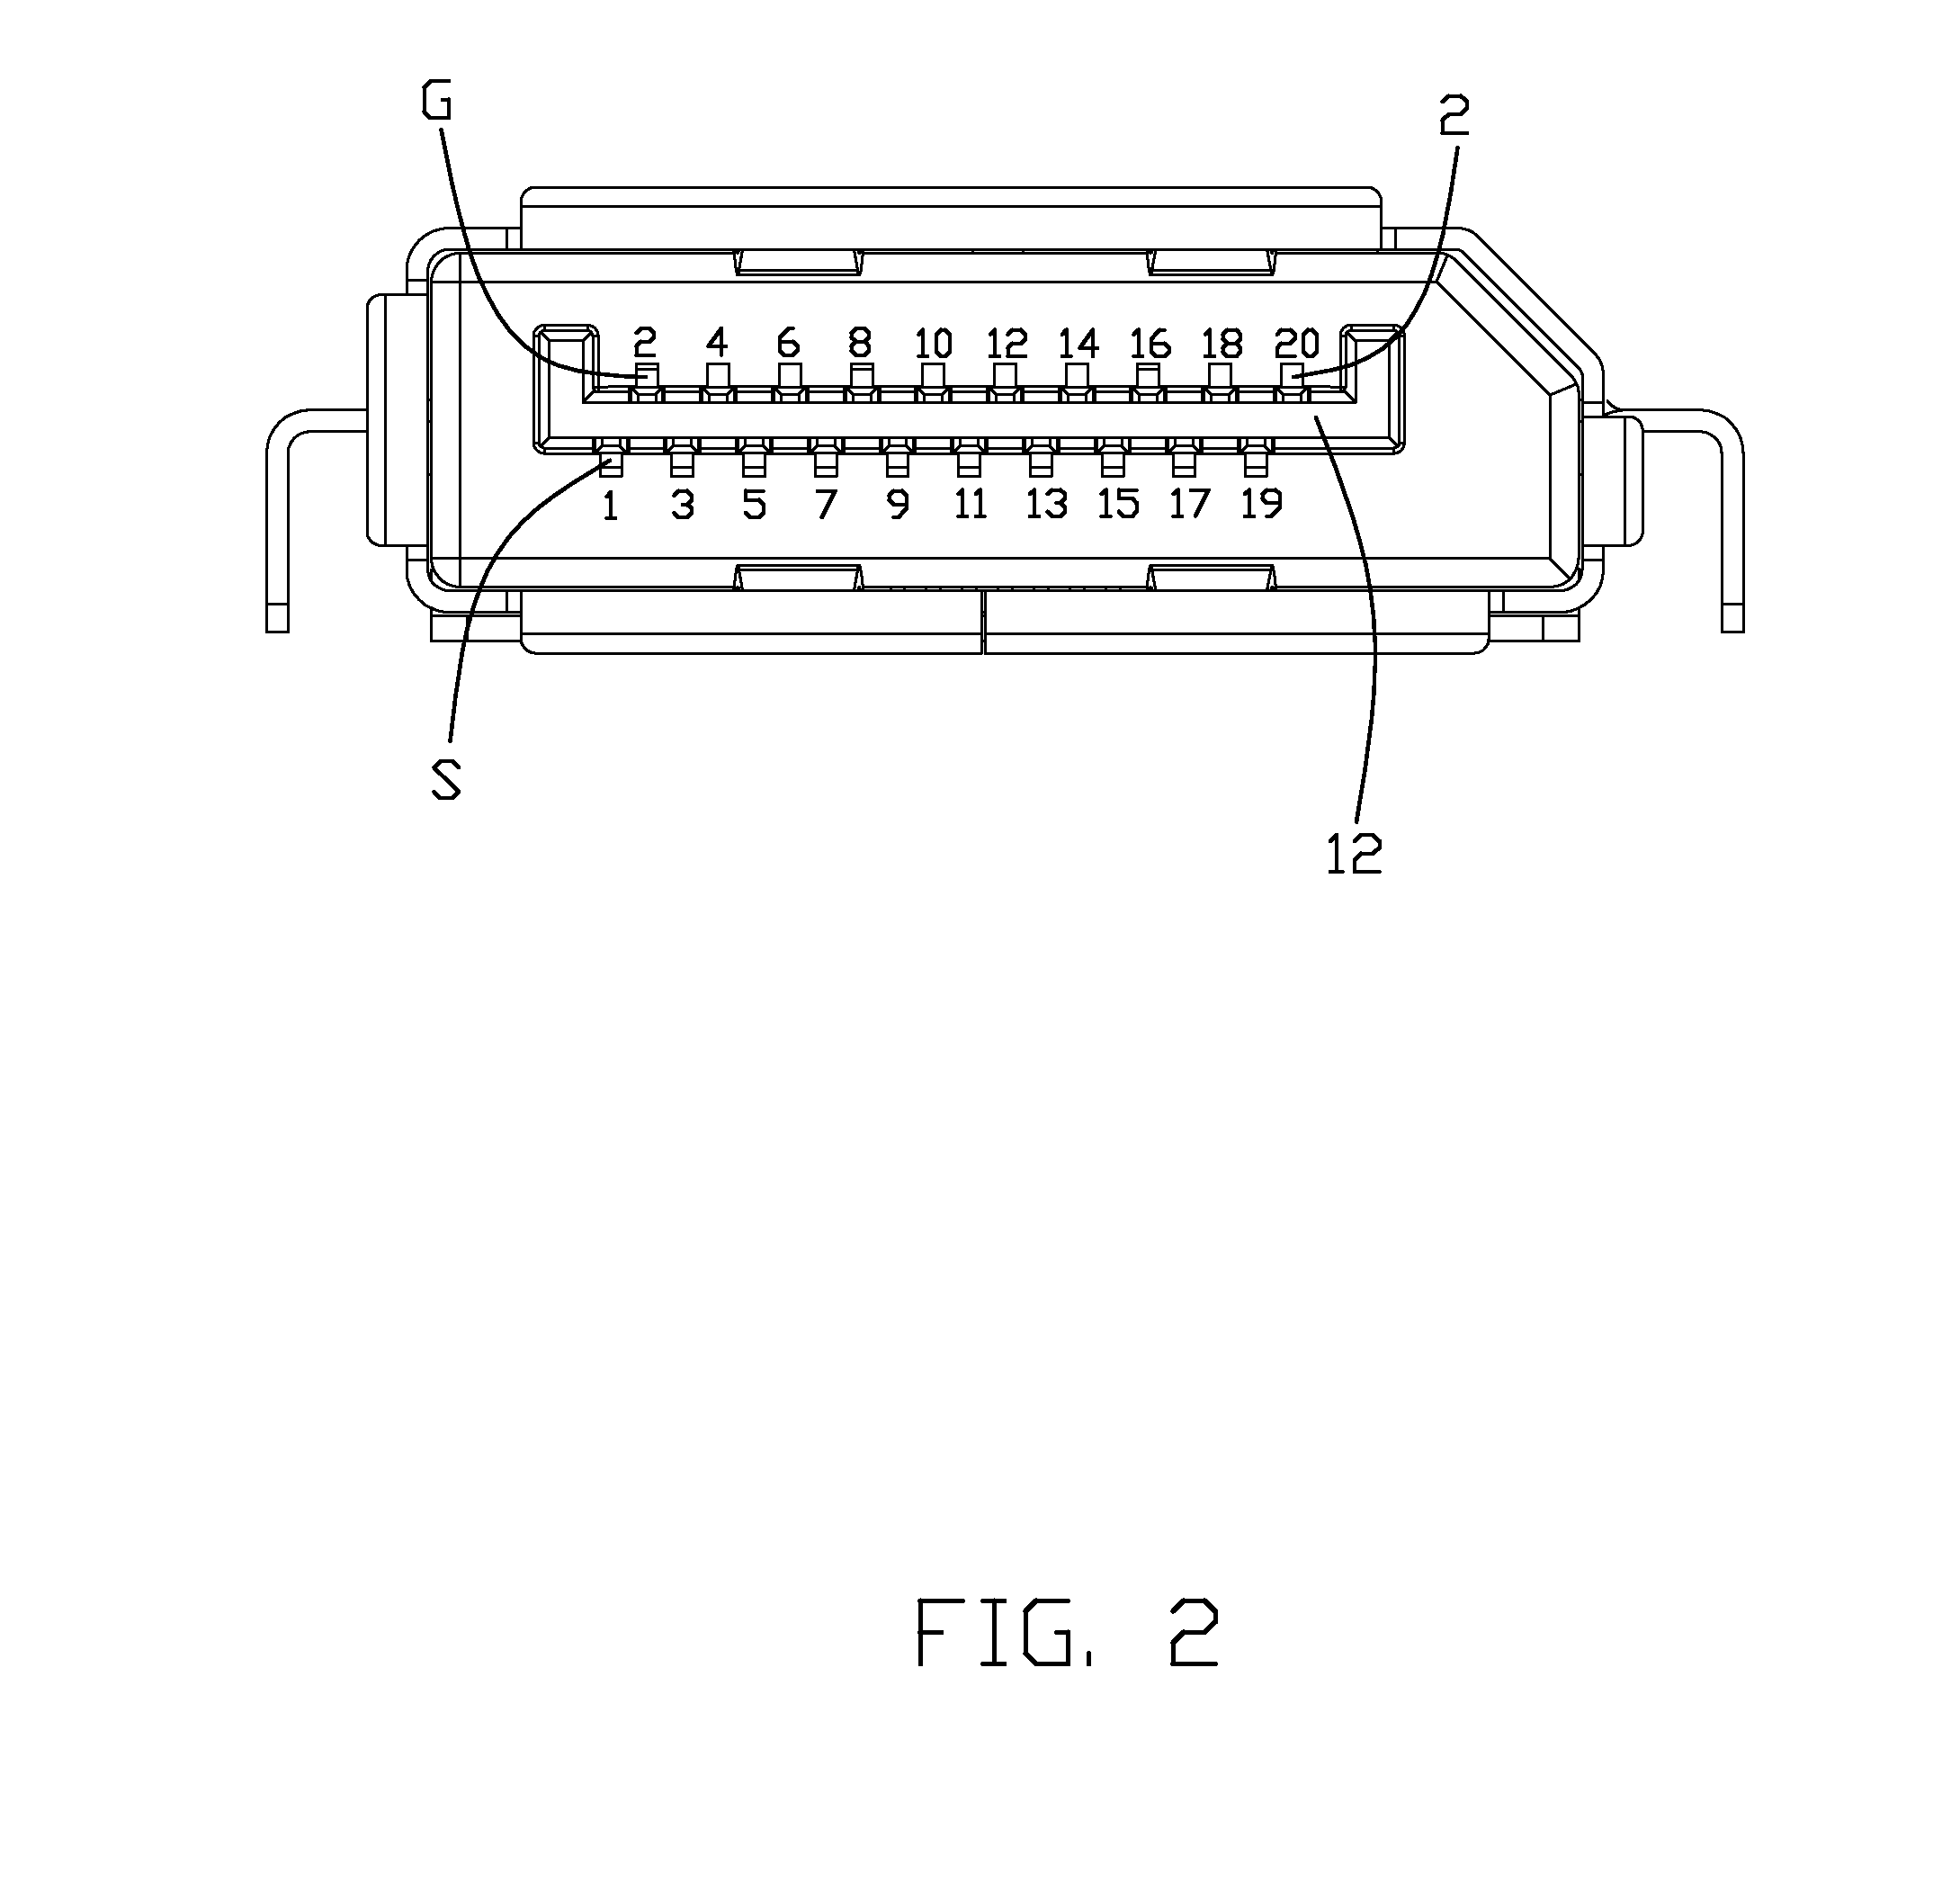 Electrical connector having grounding terminal having tail portion interconnected to metallic shell surrounding the connector